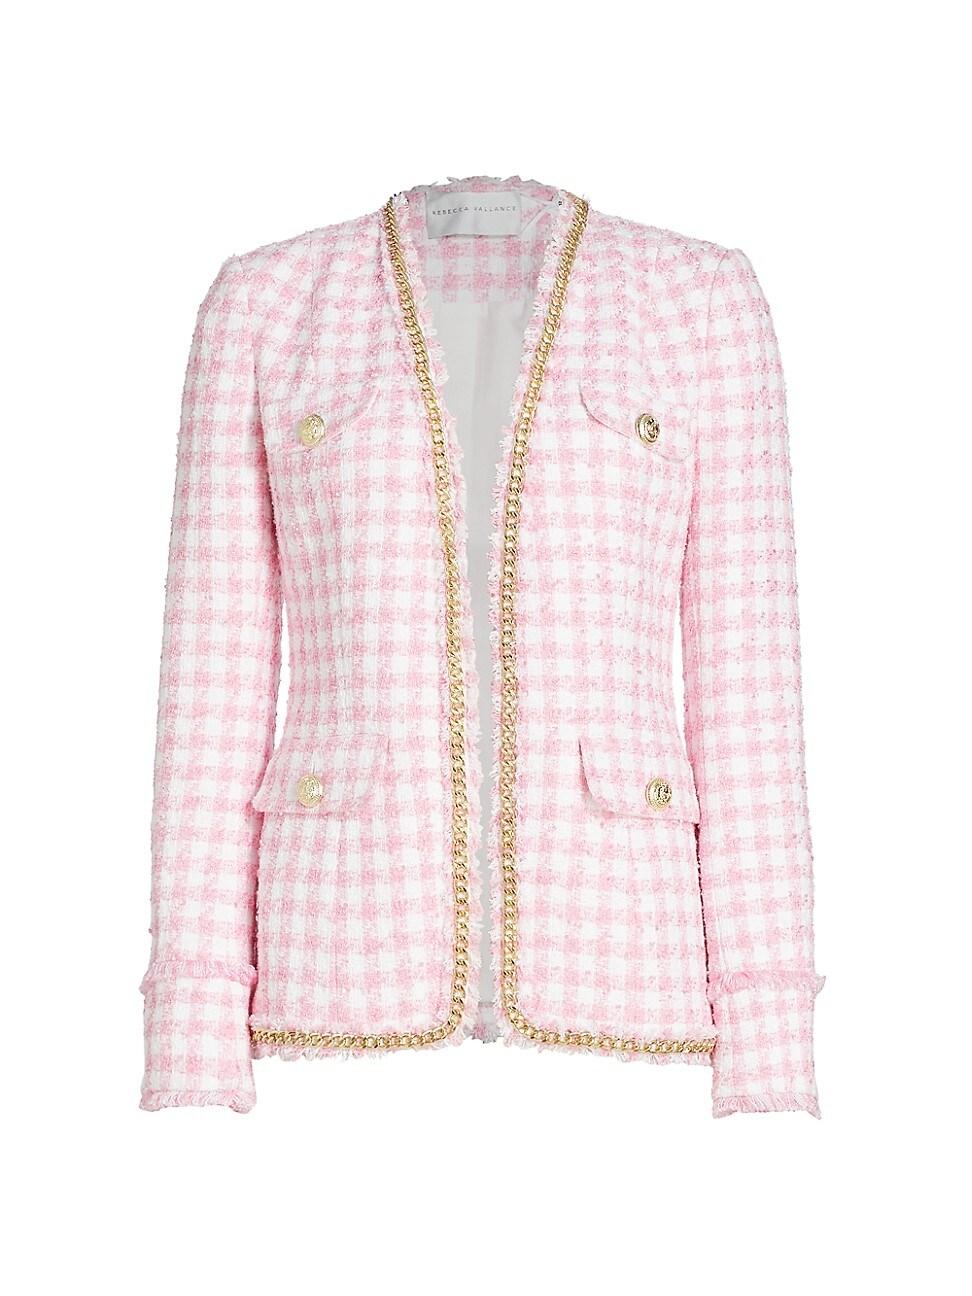 Rebecca Vallance Gabrielle Check Tweed Jacket in Pink | Lyst